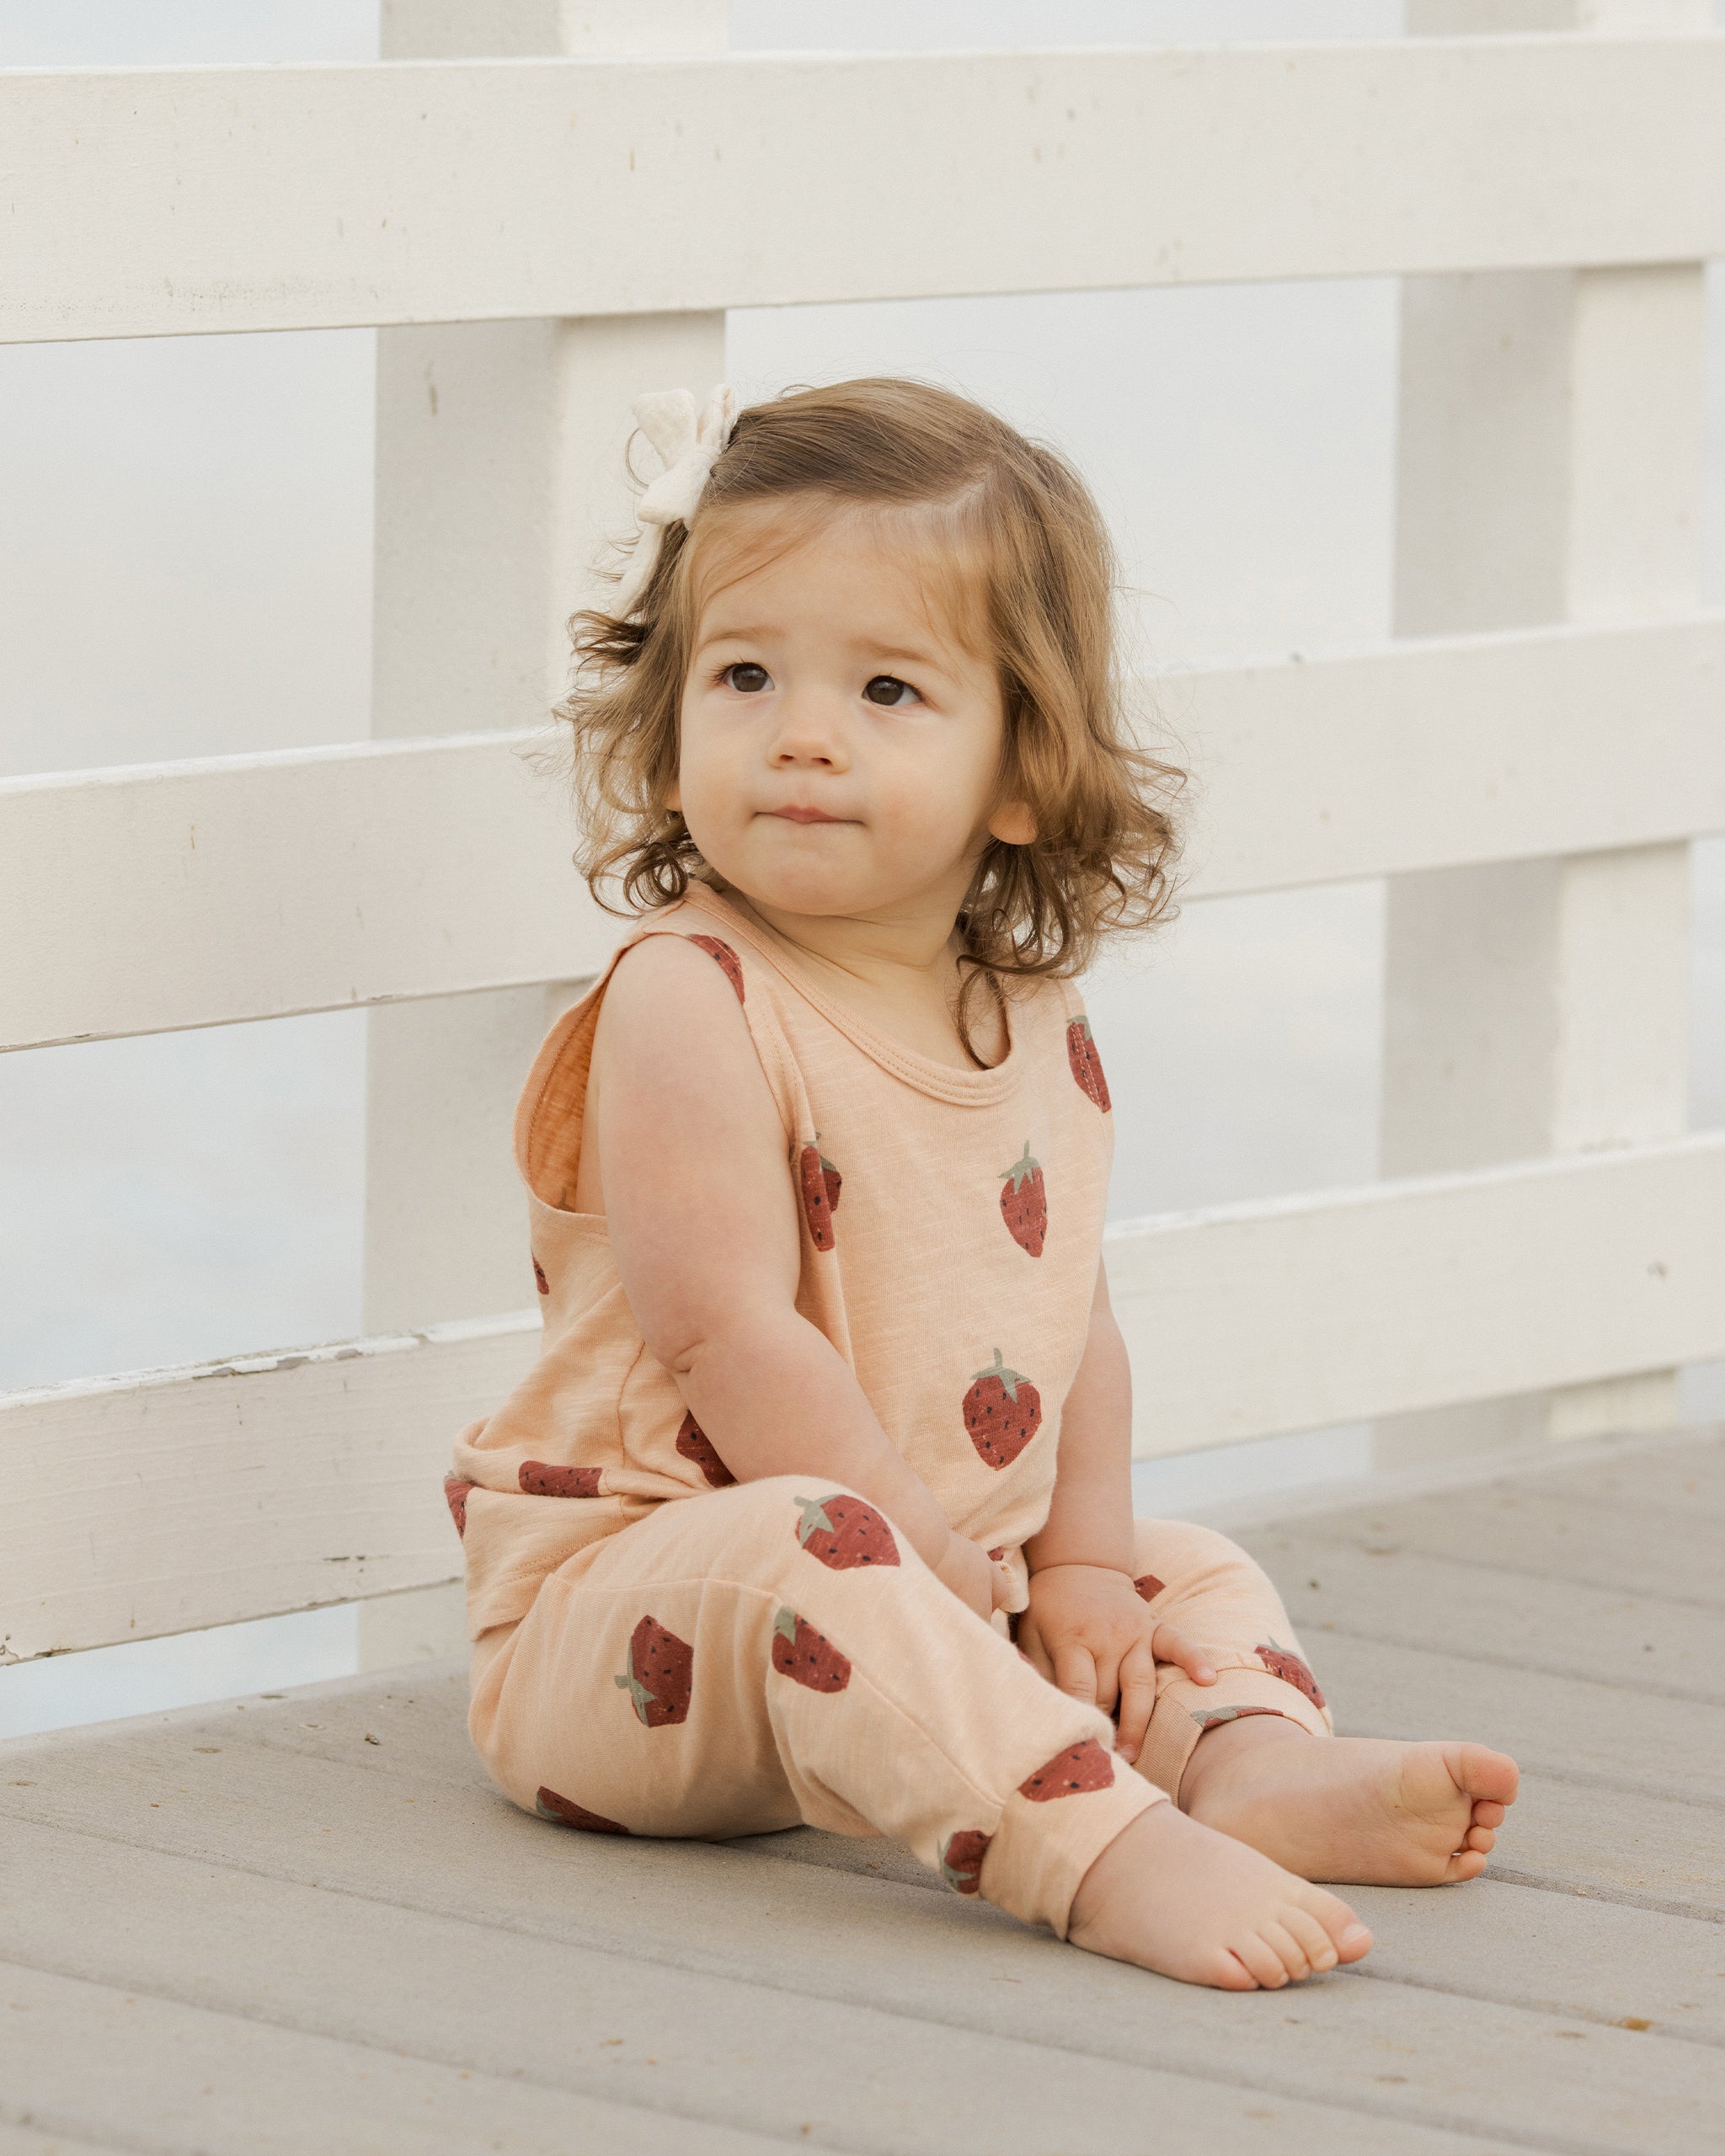 Tank + Slouch Pant Set || Strawberries - Rylee + Cru | Kids Clothes | Trendy Baby Clothes | Modern Infant Outfits |